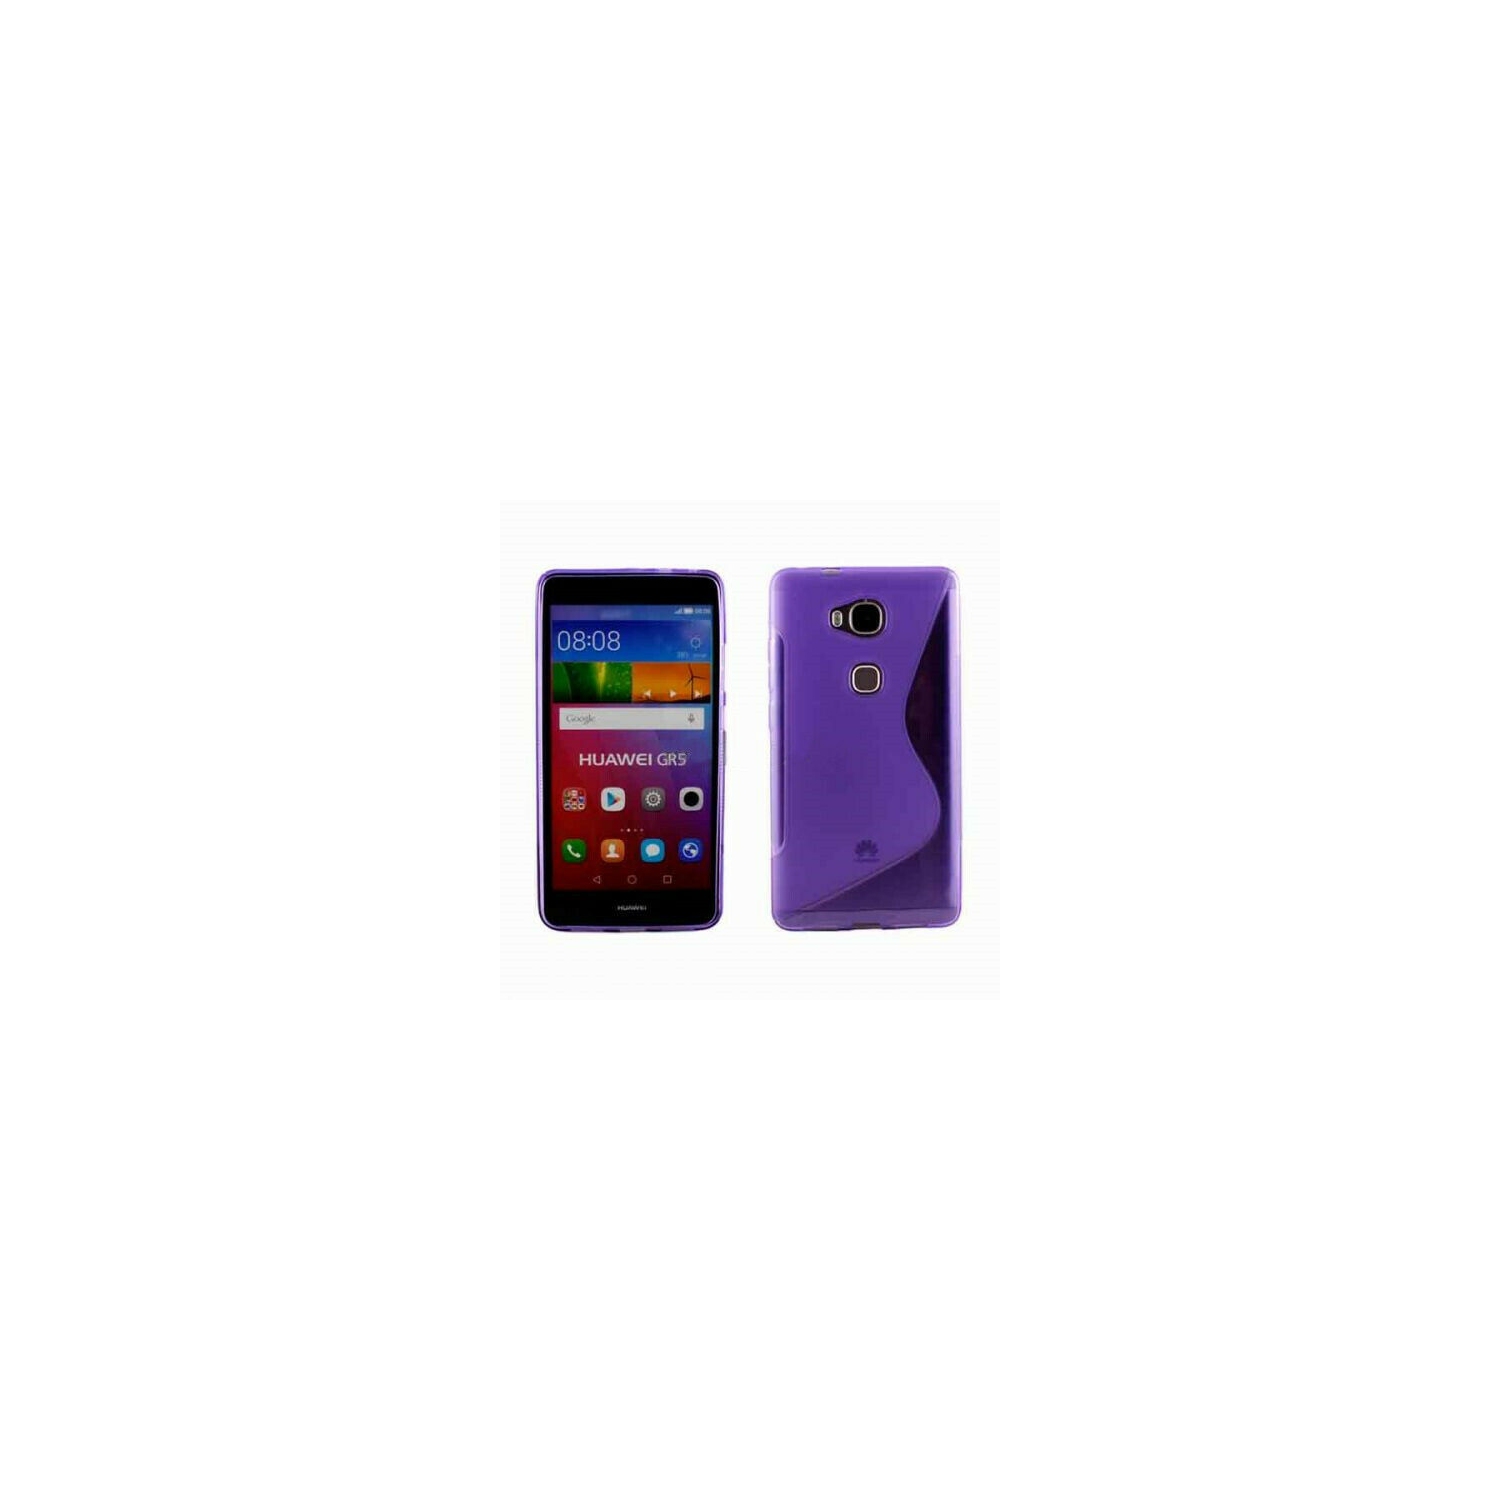 【CSmart】 Ultra Thin Soft TPU Silicone Jelly Bumper Back Cover Case for Huawei GR5 / Honor 5x, Purple